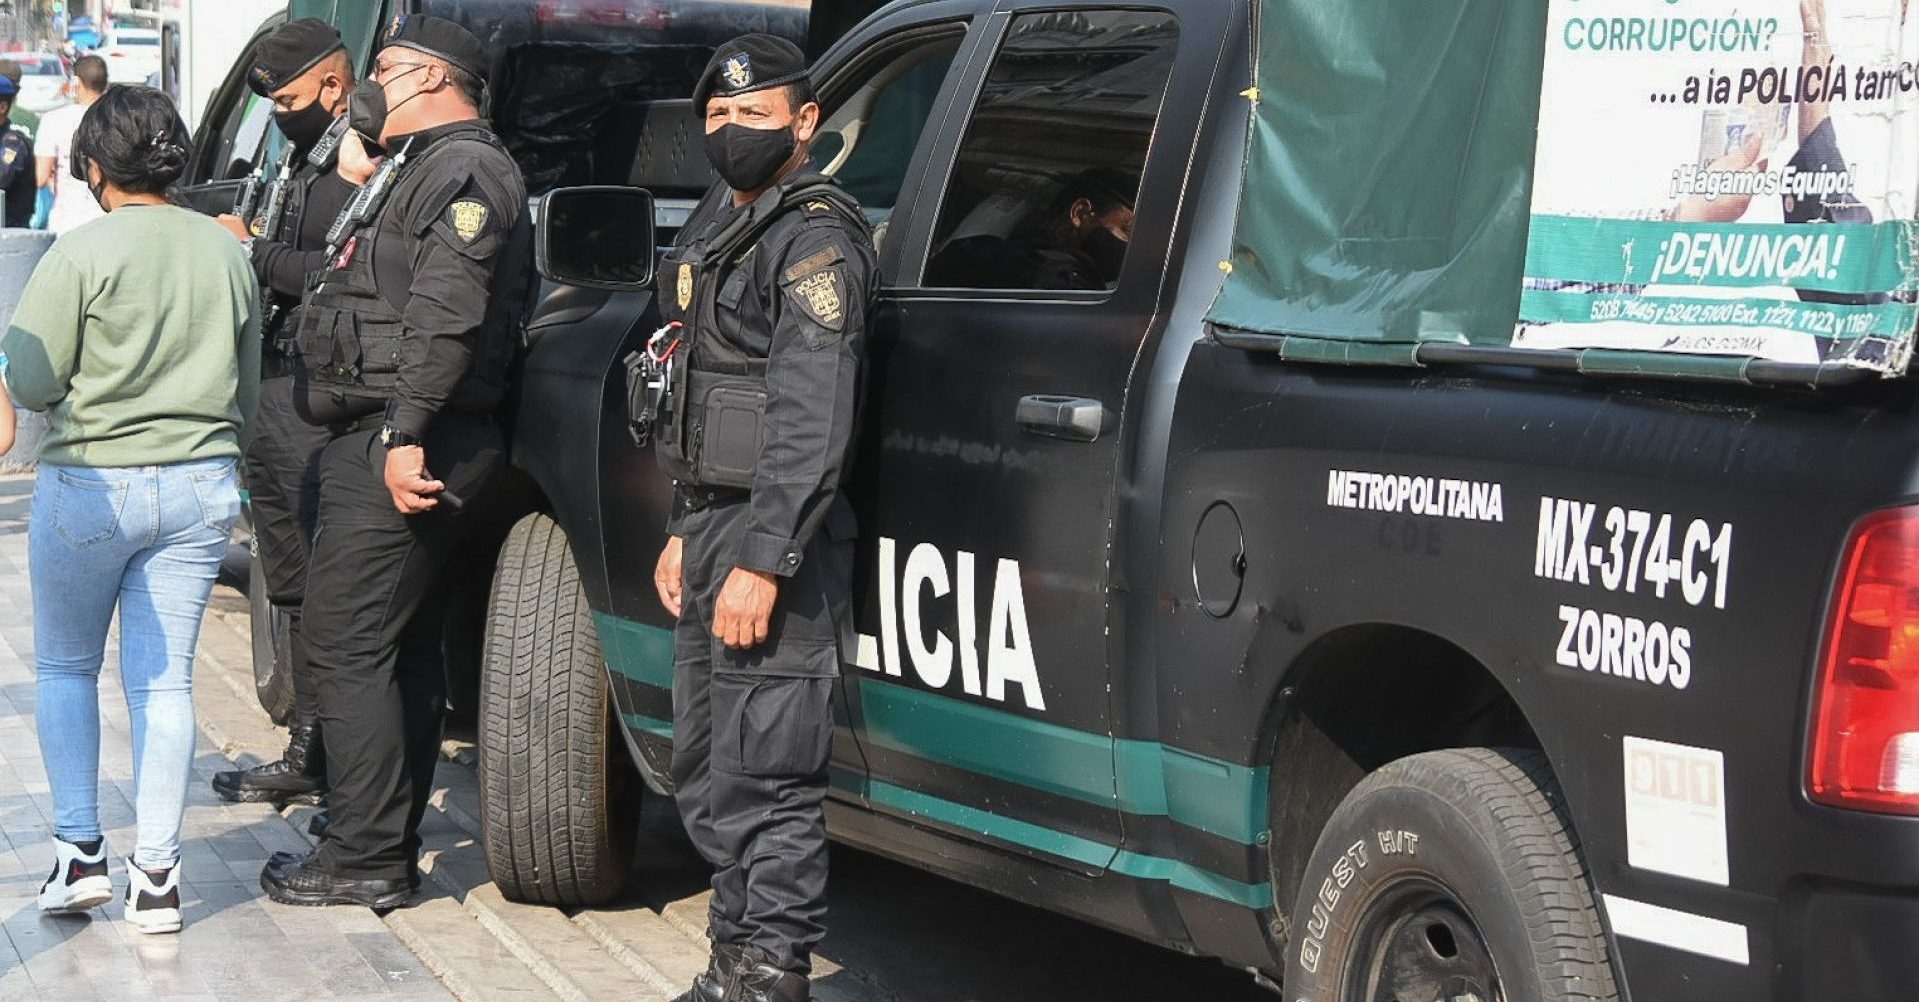 15 CDMX cops arrested for murder of a minor in Naucalpan